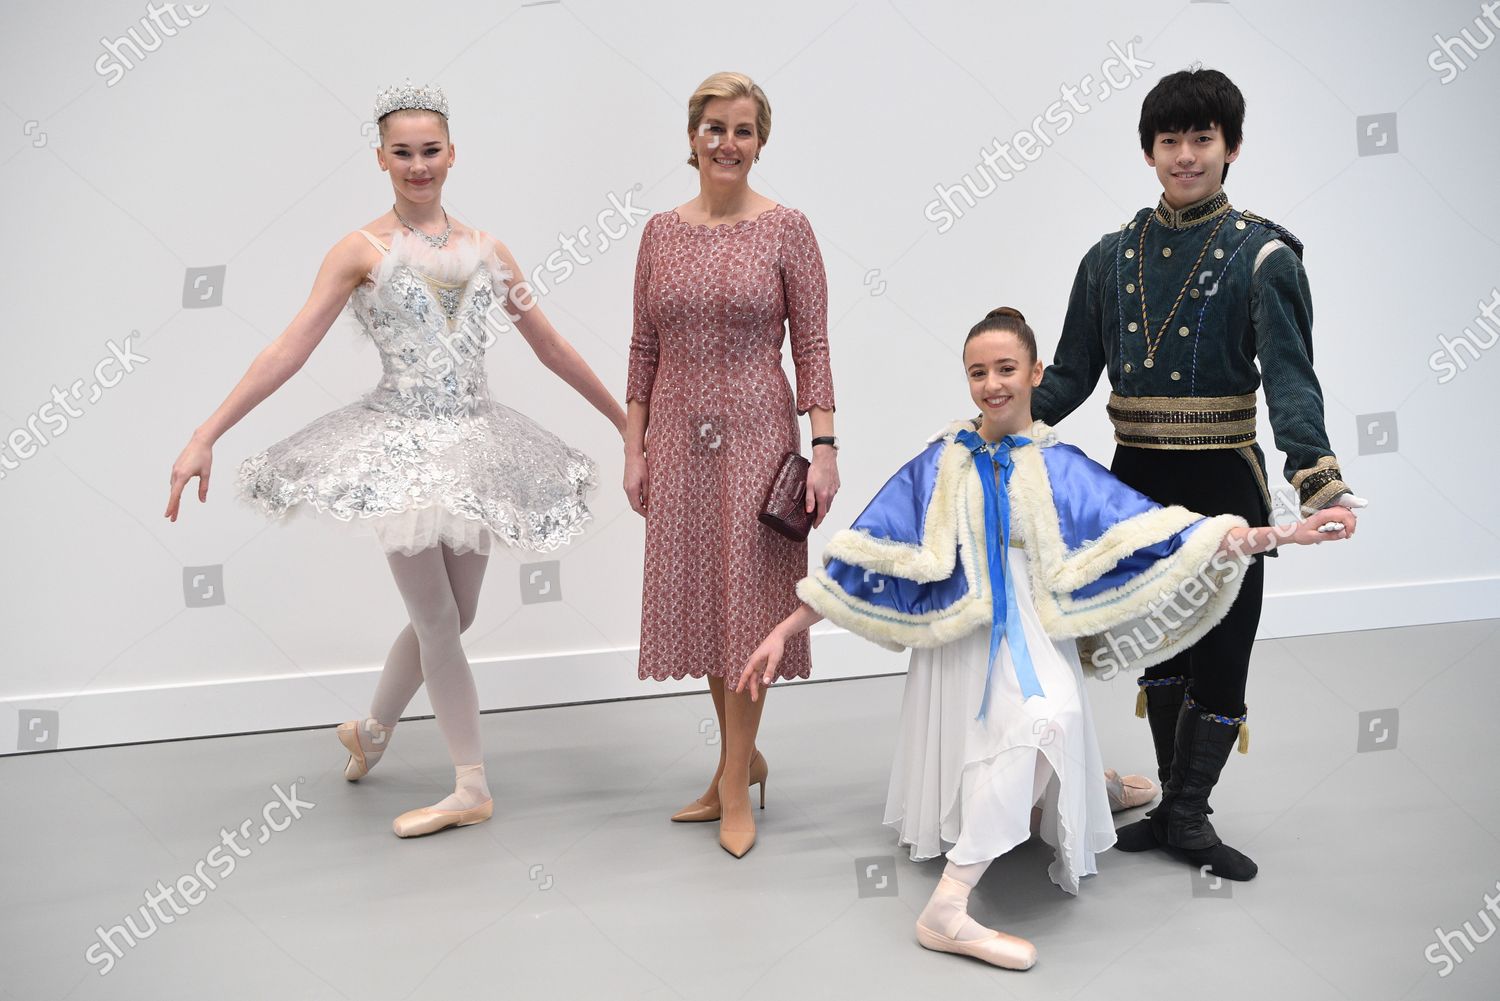 sophie-countess-of-wessex-opens-a-new-studio-for-central-school-of-ballet-london-uk-shutterstock-editorial-10568616n.jpg